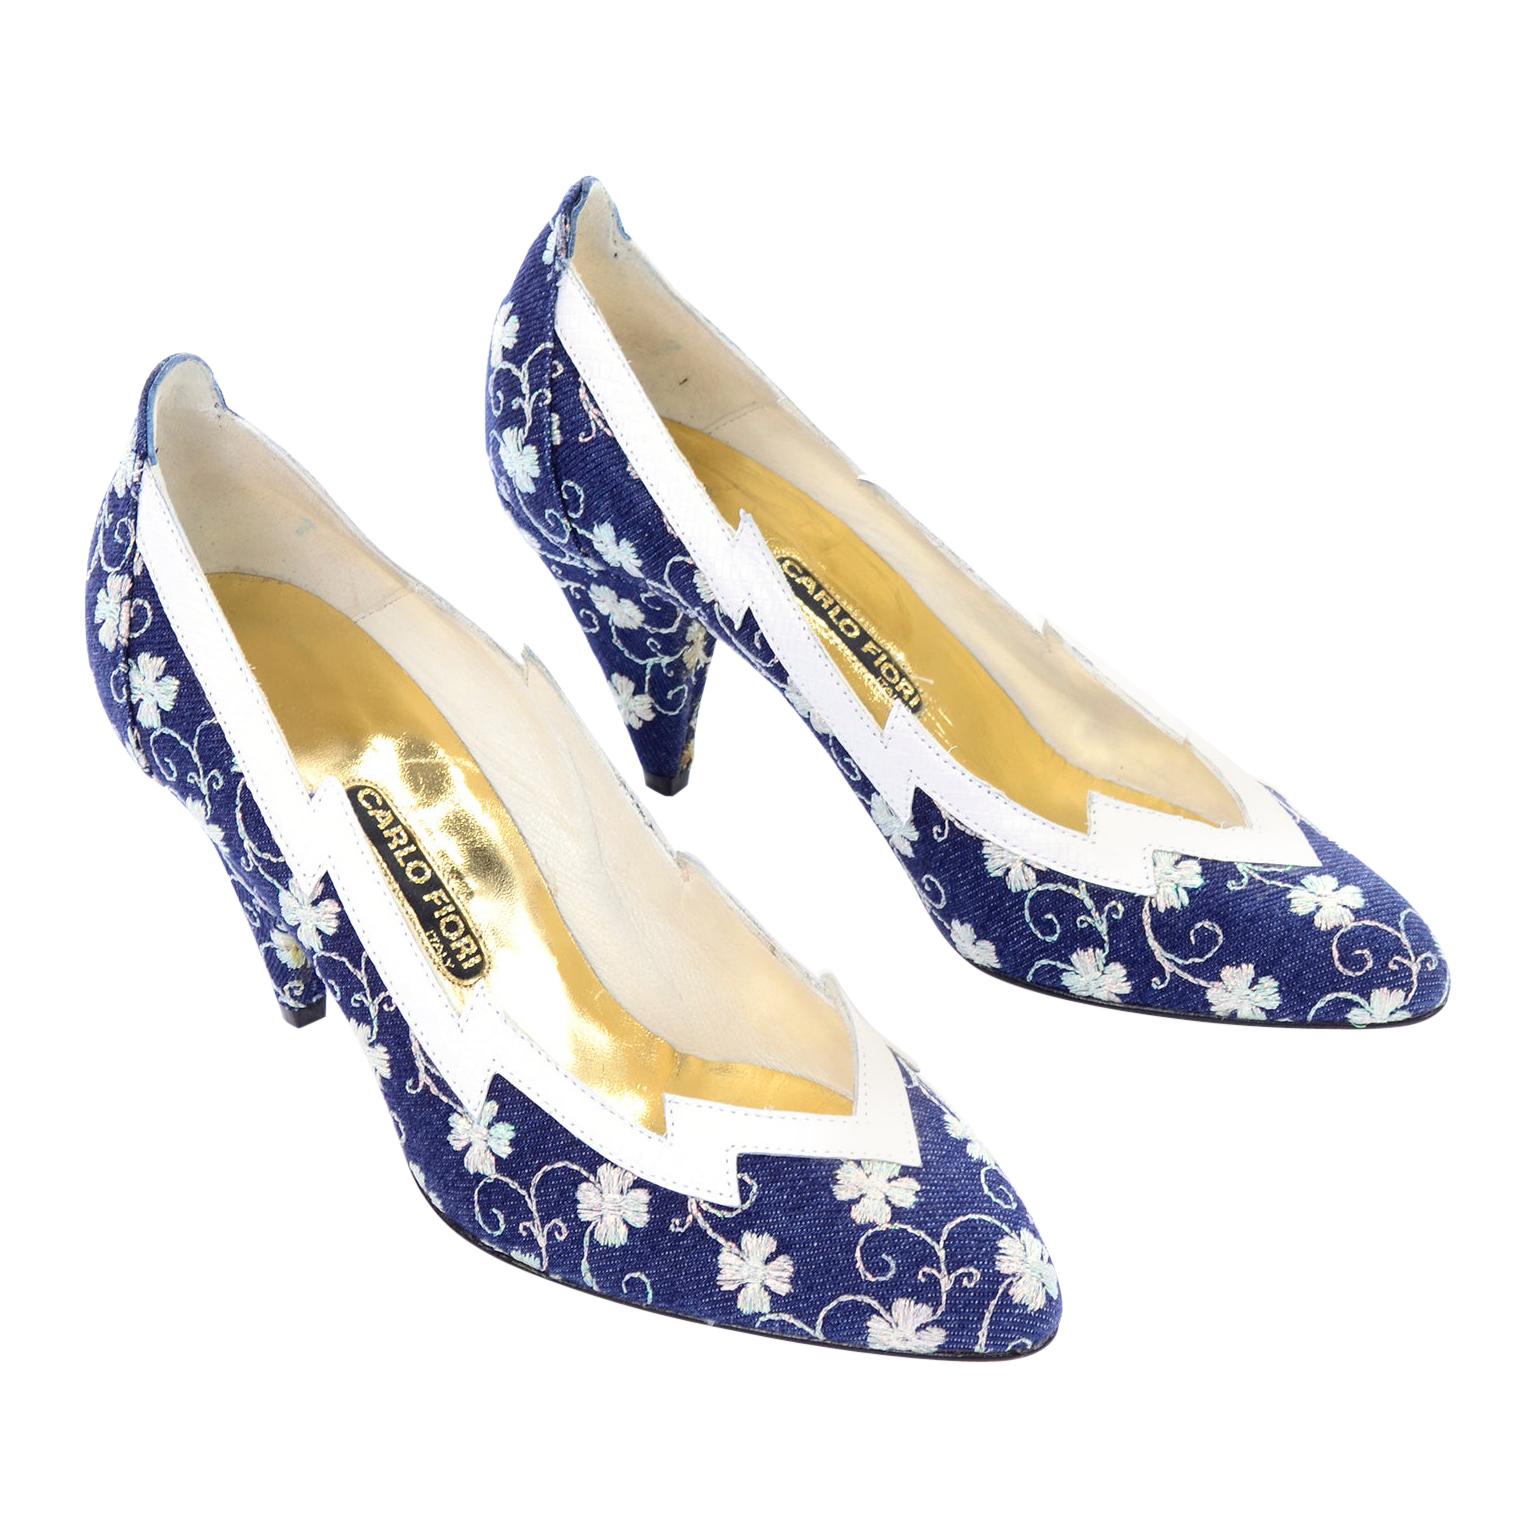 Deadstock Carlo Fiori Navy Blue & White Embroidered Shoes Unworn Size 7B